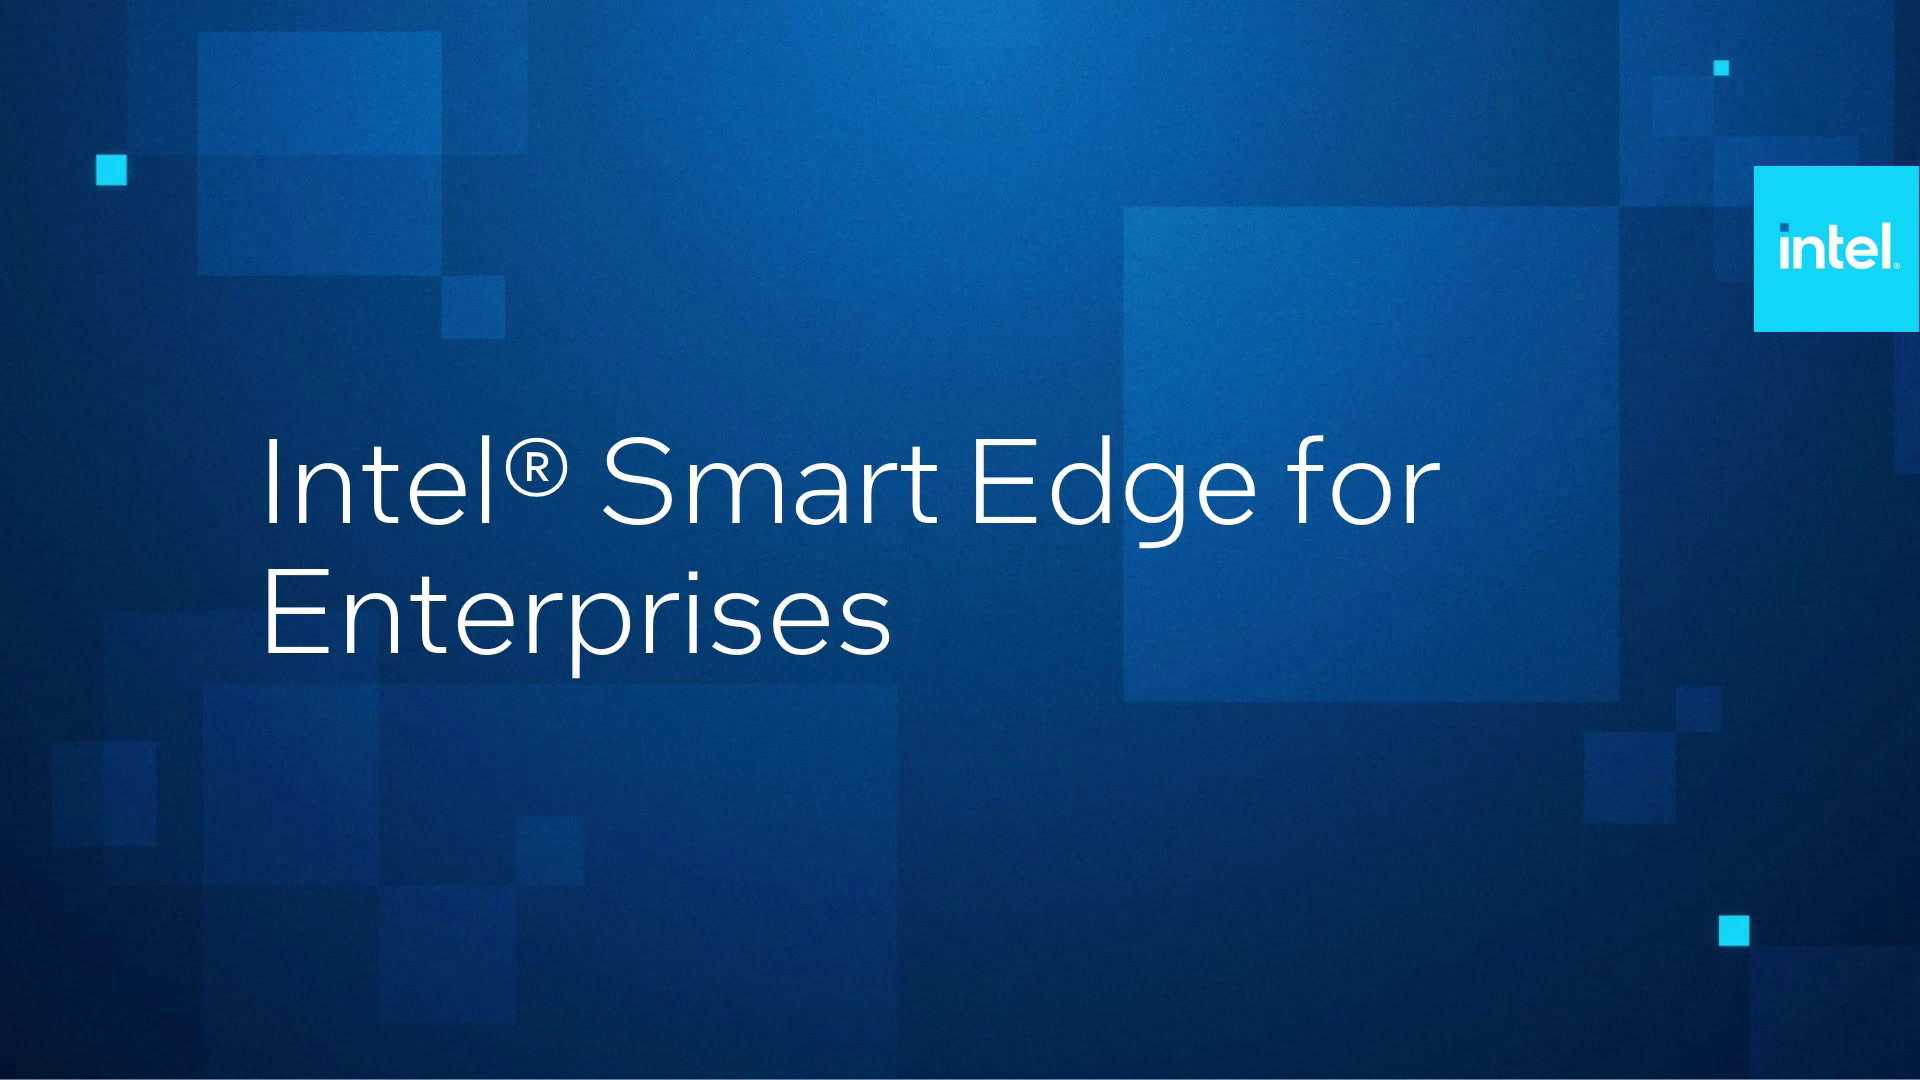 Chapter 1: Introduction to Intel® Smart Edge for Enterprises